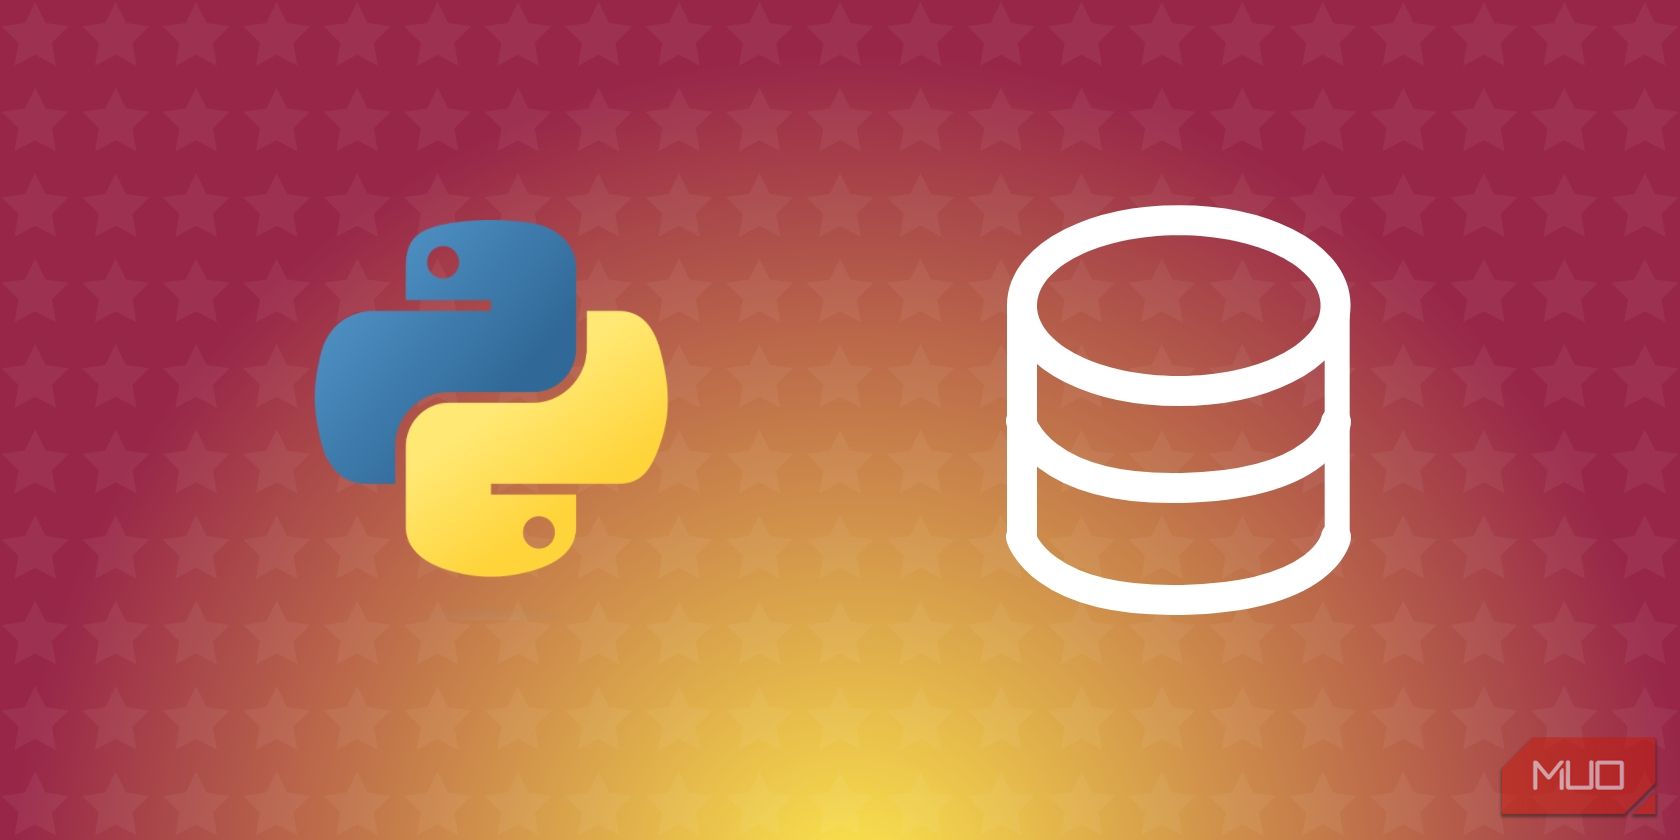 A Python logo on the left and a database represented by a cylinder shape with lines at intervals on the right. 